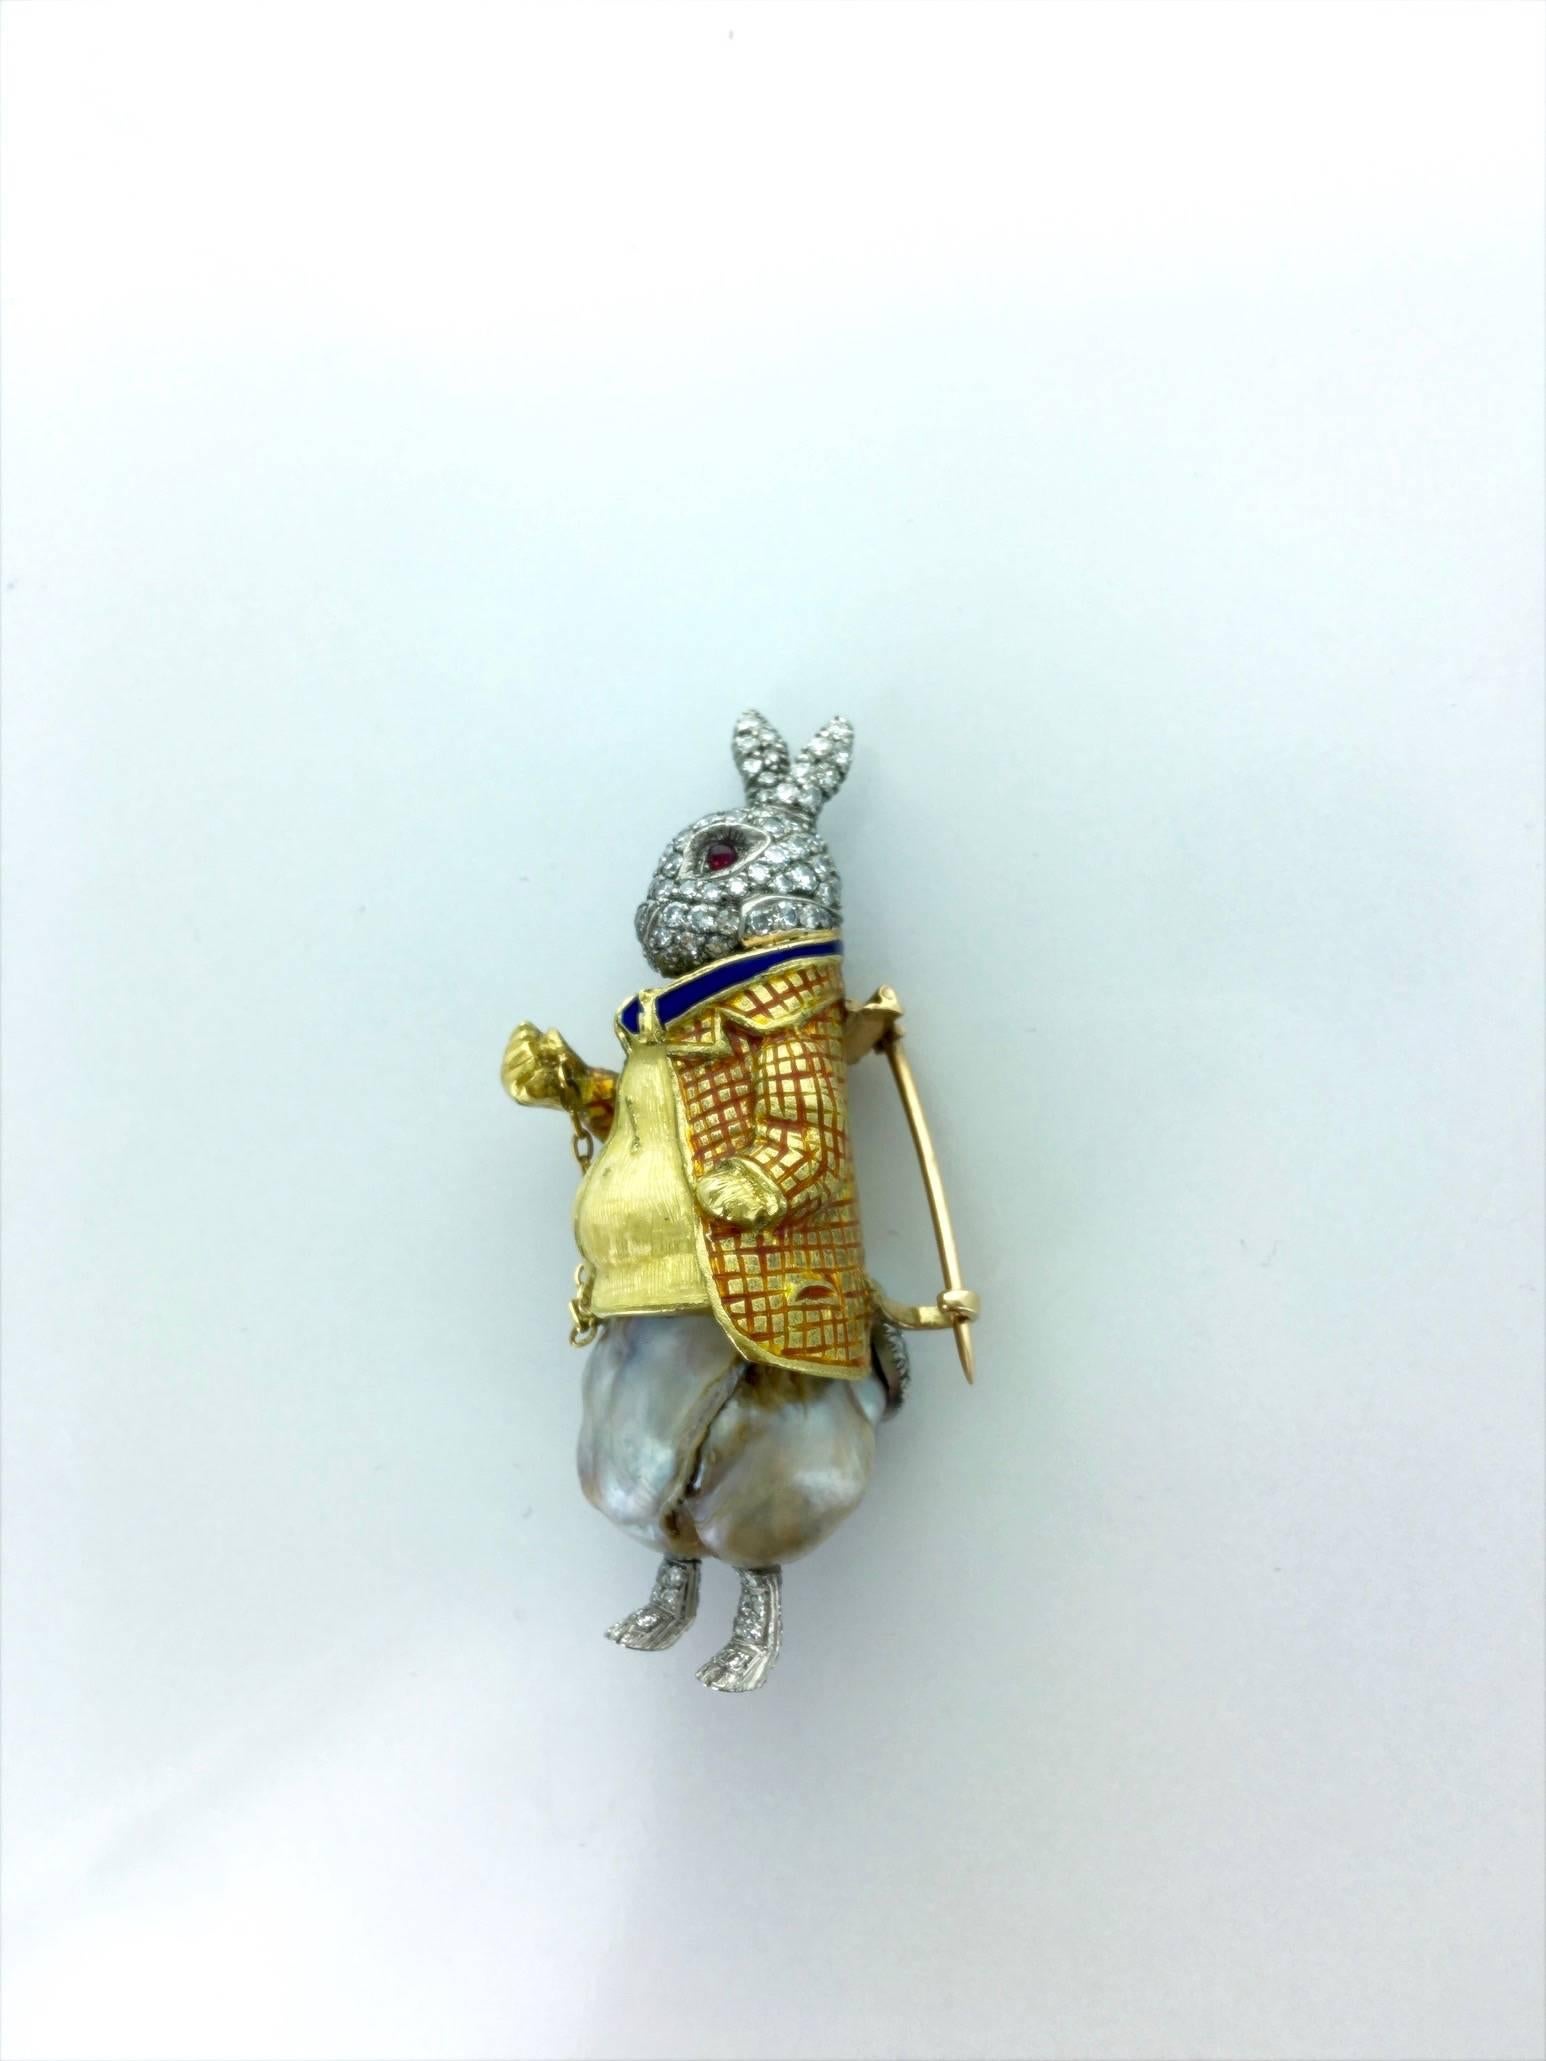 Oh dear! Oh dear! I shall be too late!

Of course, this unique and awesome White Rabbit reminds the fictional character in Lewis Carroll's book Alice's Adventures in Wonderland.
All in platinum and yellow gold 18k 750, it is set by diamond and